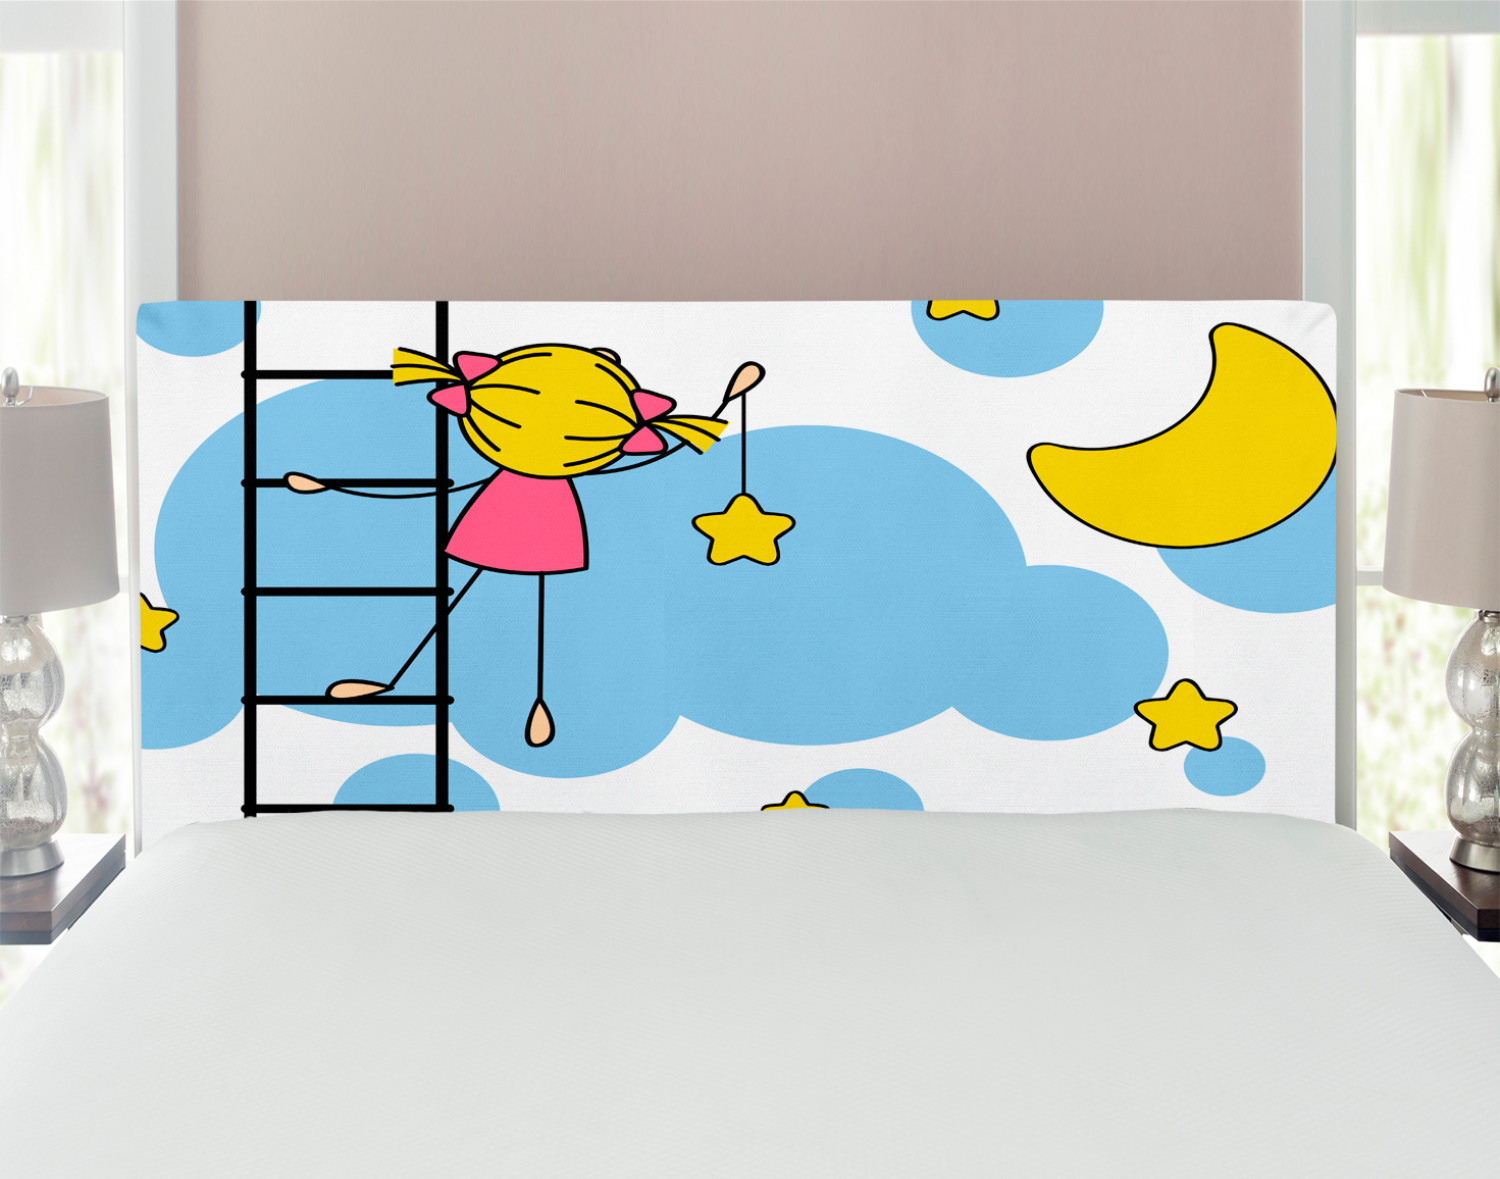 Star Headboard, Girl on Ladder Hanging a Star in the Night Sky with Half Moon Cartoon Picture, Upholstered Decorative Metal Bed Headboard with Memory Foam, Full Size, Yellow Blue, by Ambesonne - image 1 of 4